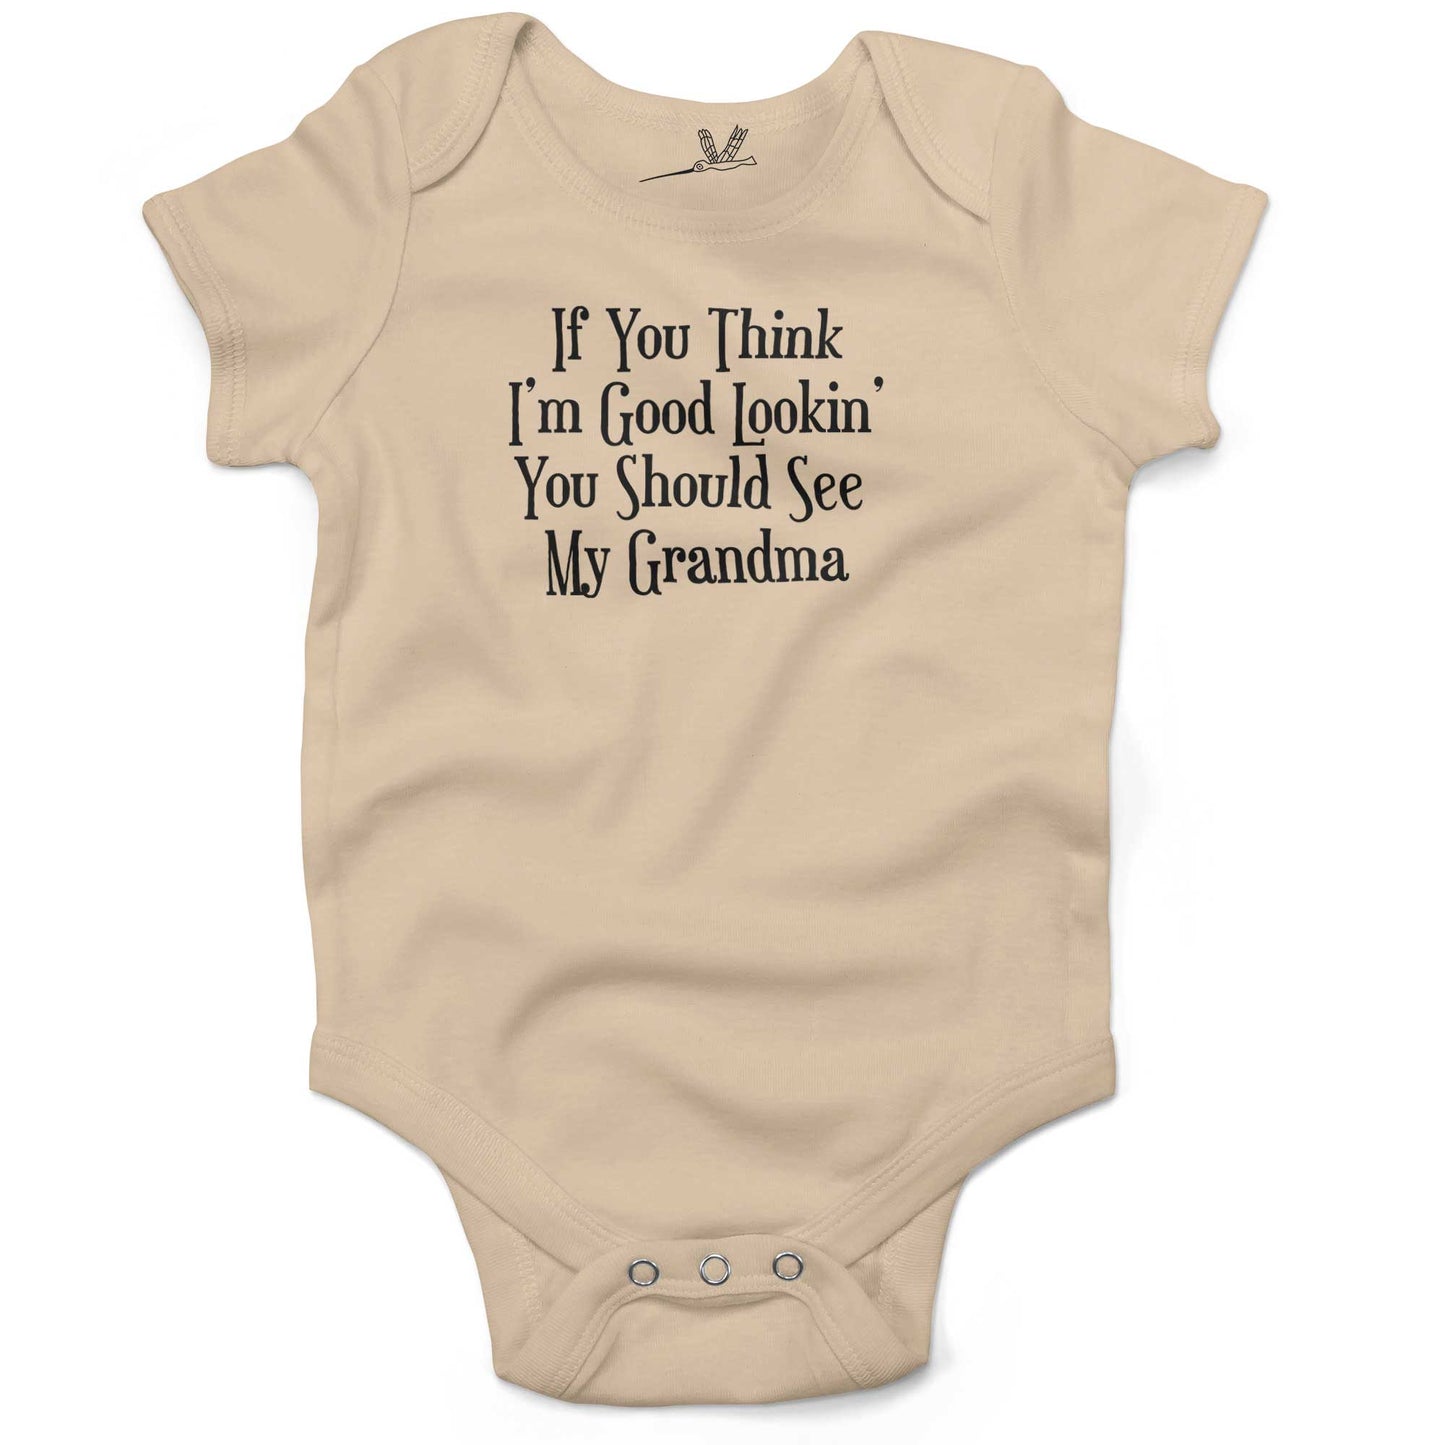 If You Think I'm Good Lookin', You Should See My Grandma Infant Bodysuit or Raglan Tee-Organic Natural-3-6 months